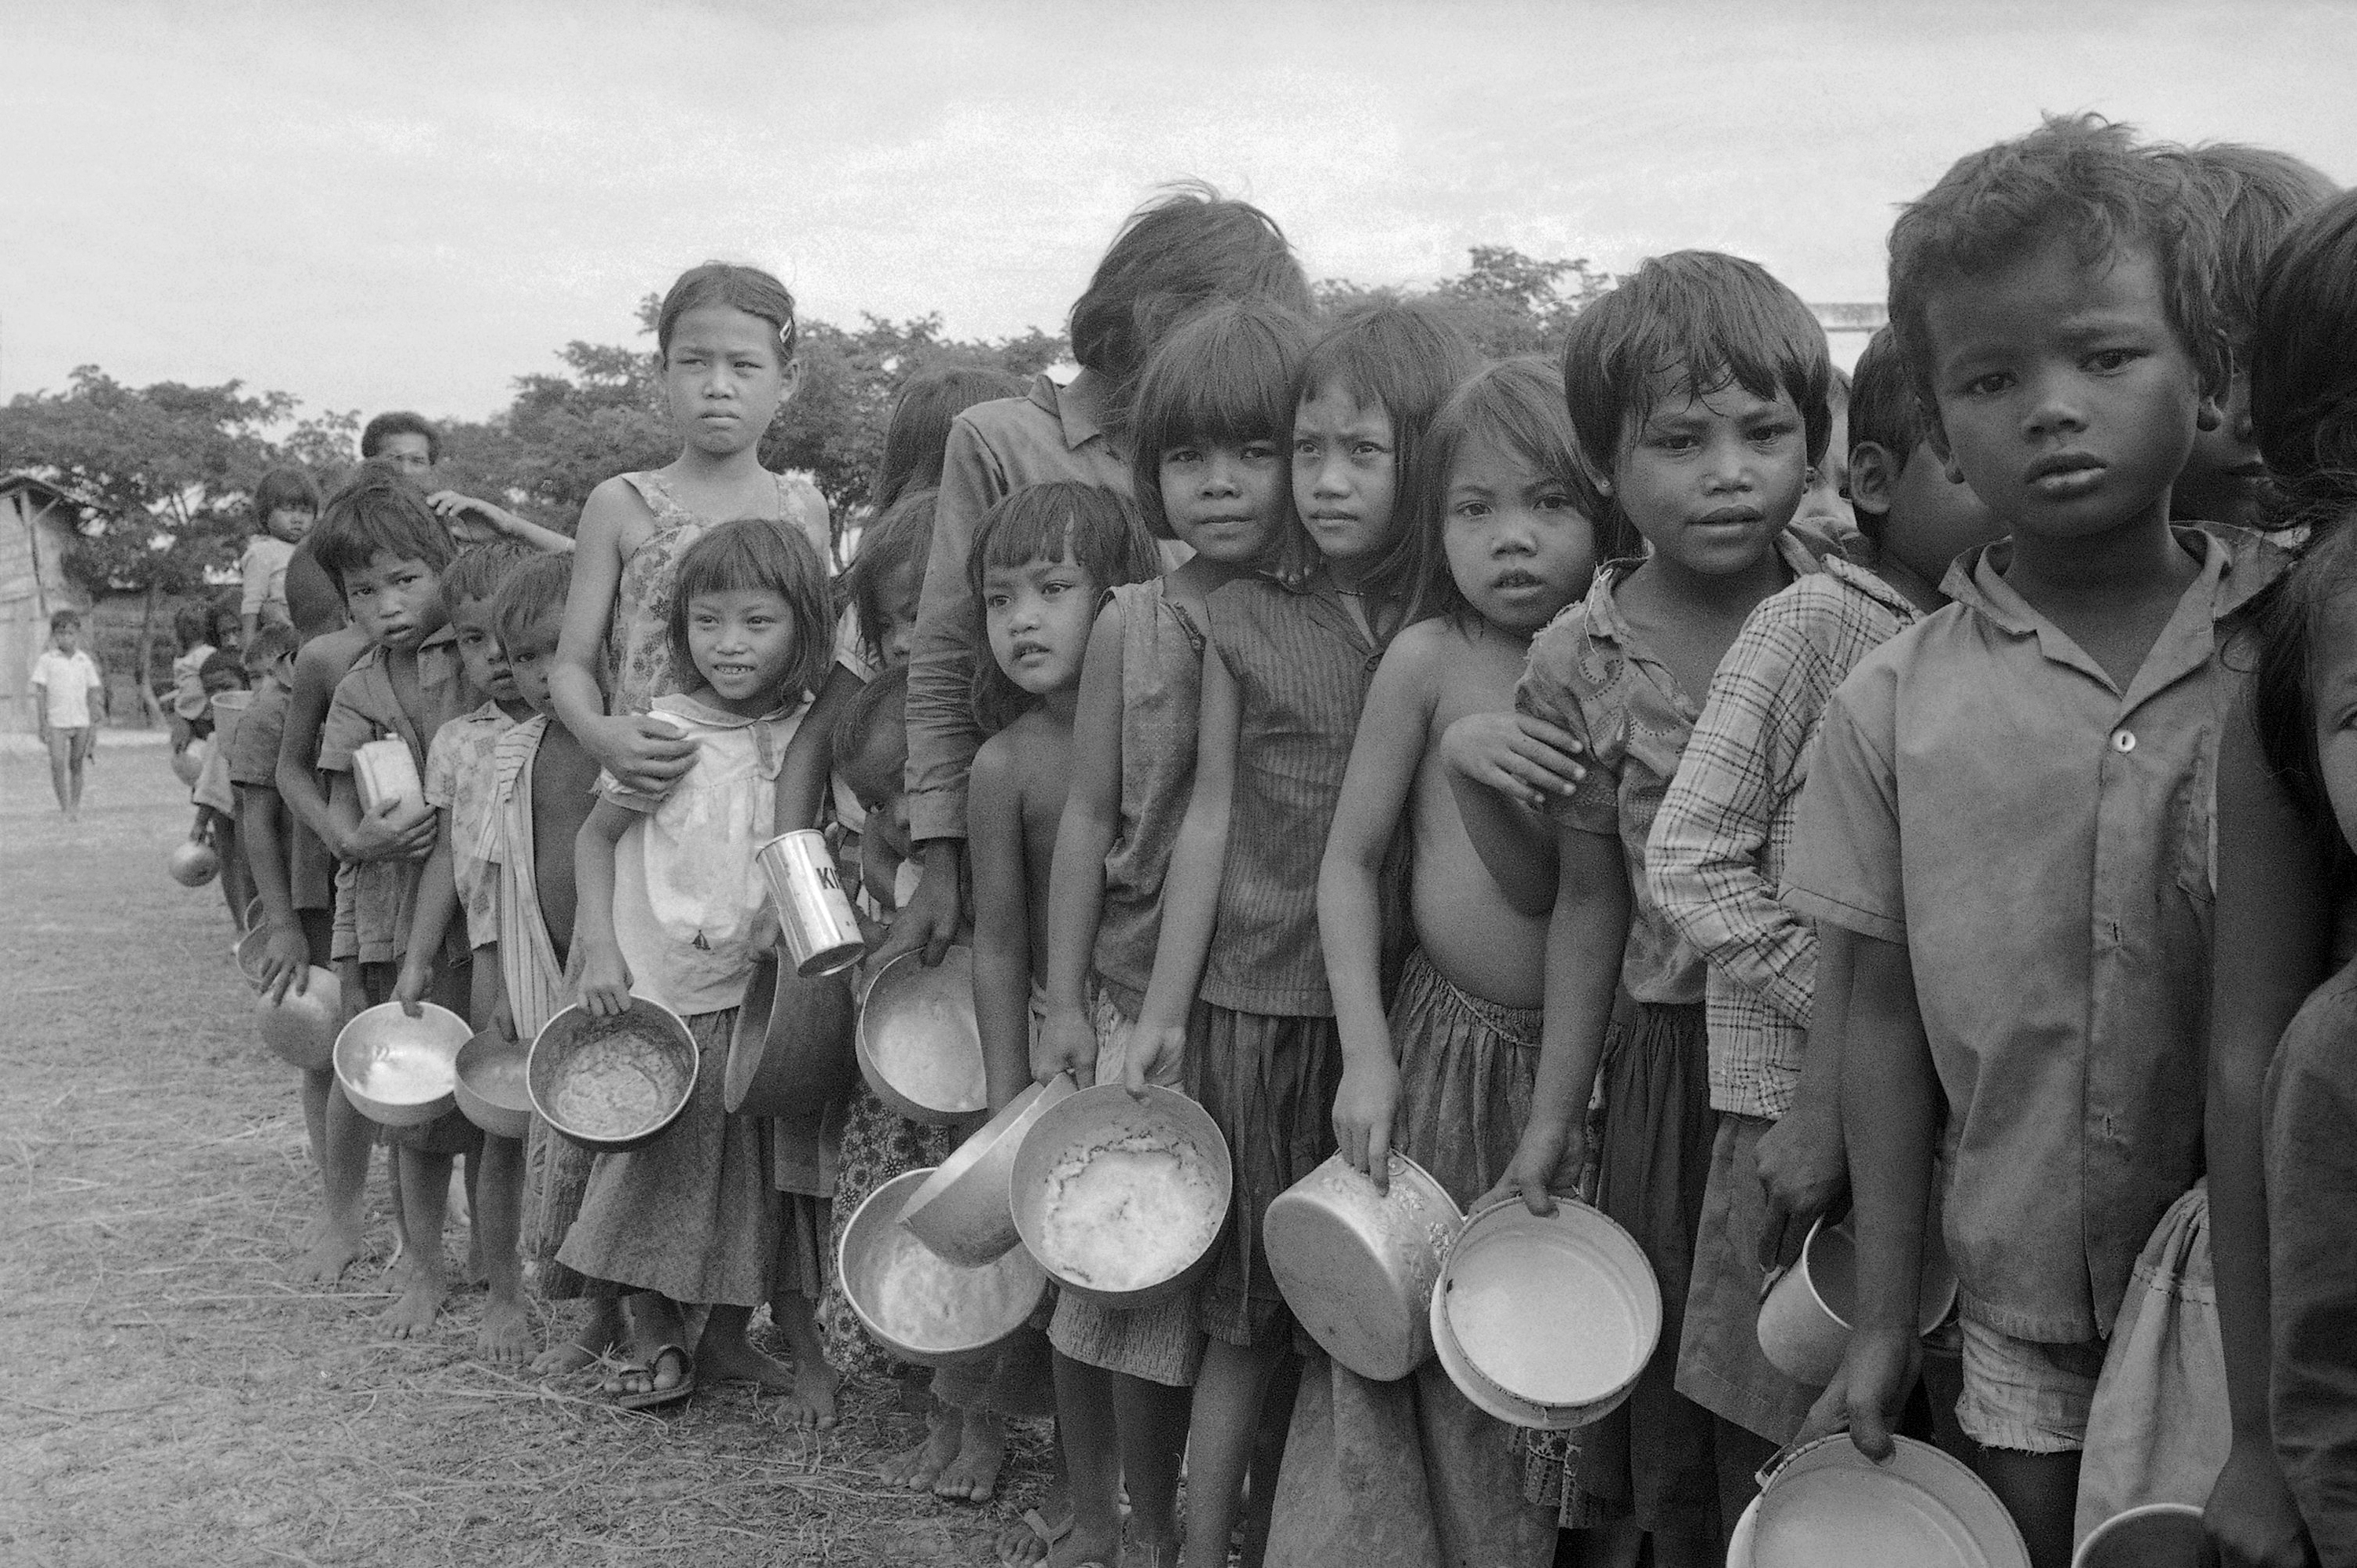 Cambodian refugee children wait their turn at an aid organization's feeding station northwest of Phnom Penh, Cambodia, January 9, 1975. The youths and their families fled the Phnom Basset area after Khmer Rouge raids nearby.  (Tea Kim Heang aka Moonface—AP)